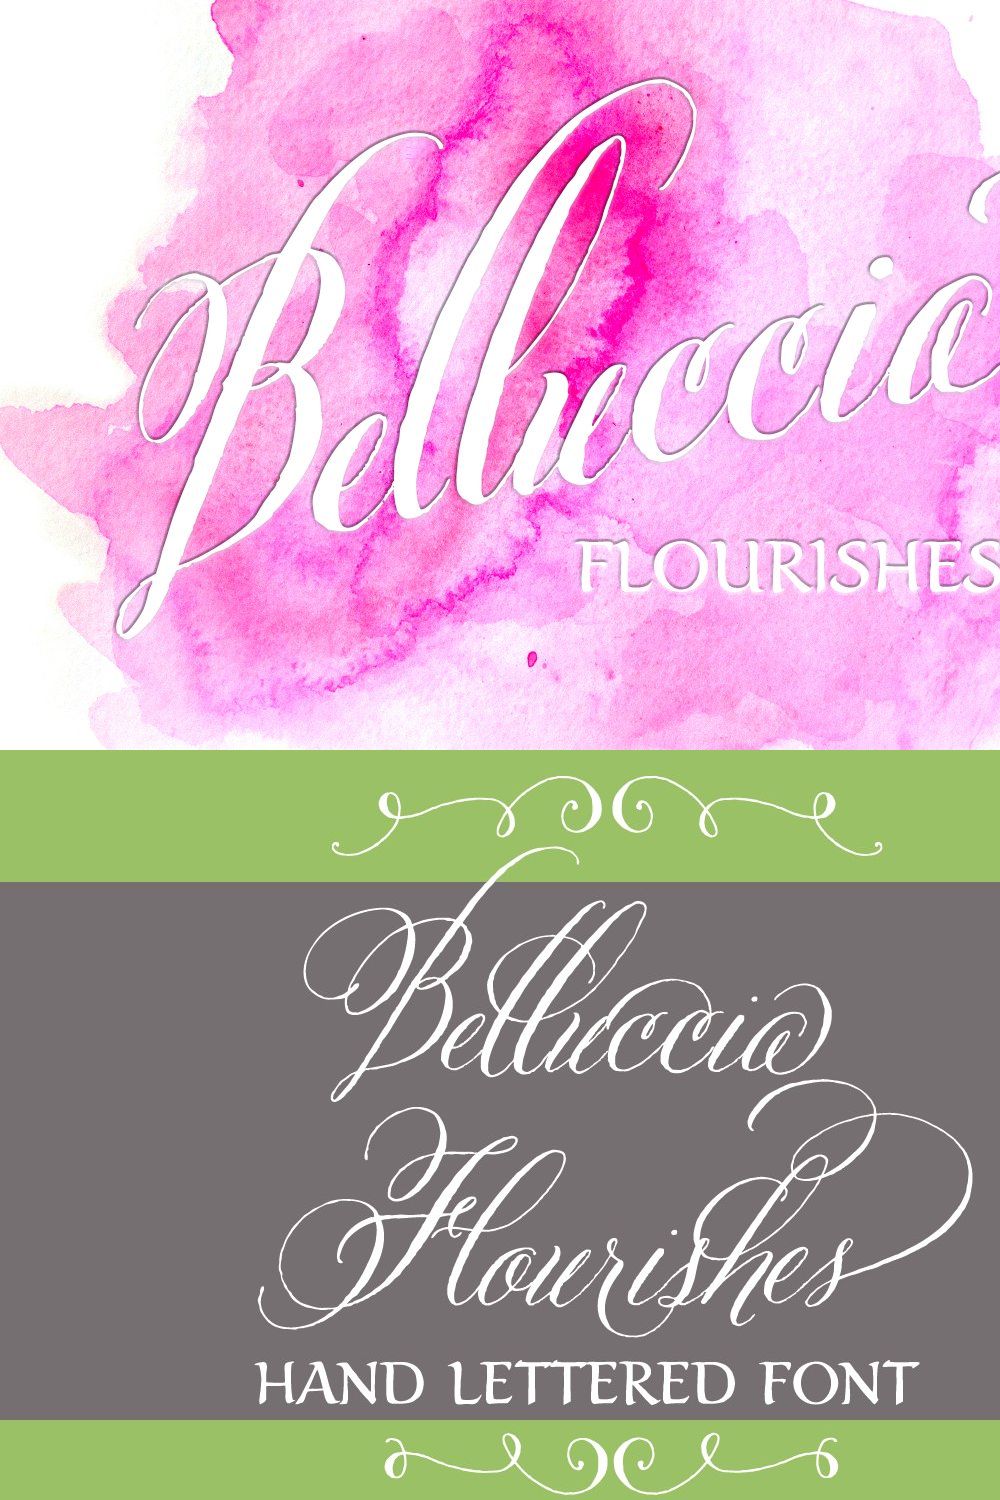 Belluccia Hand Drawn Flourishes pinterest preview image.